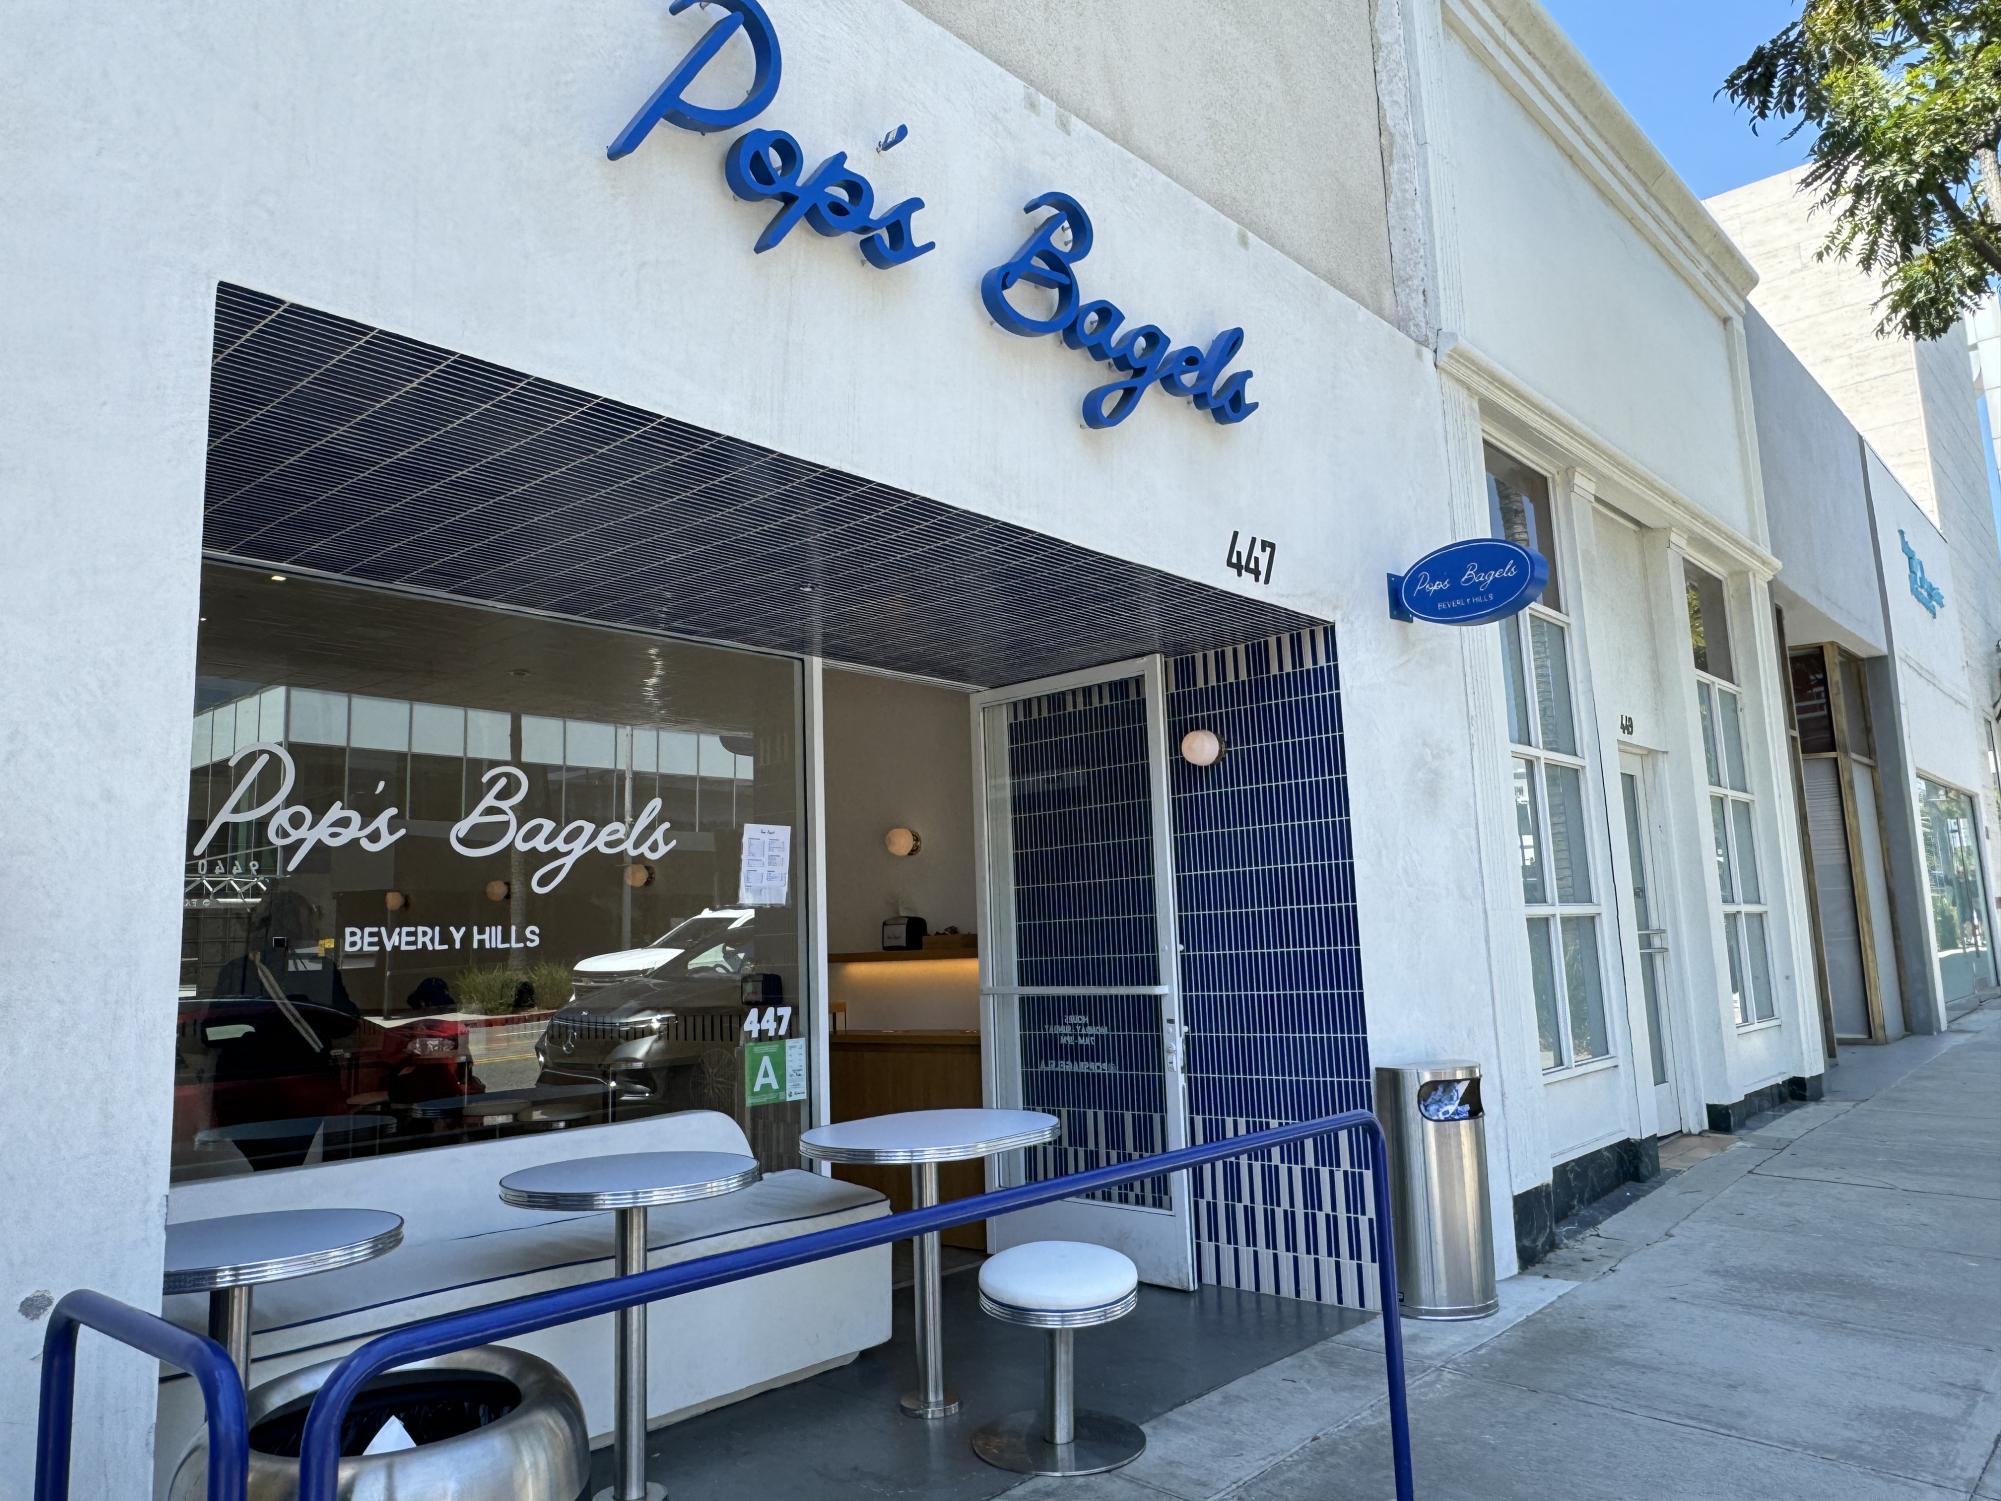 Pops Bagels Beverly Hills location rests on North Beverly Drive, a vibrant and popular street in LA. After visiting the bagel shop, you can walk along the street and adjacent ones for shopping, photos and more! 